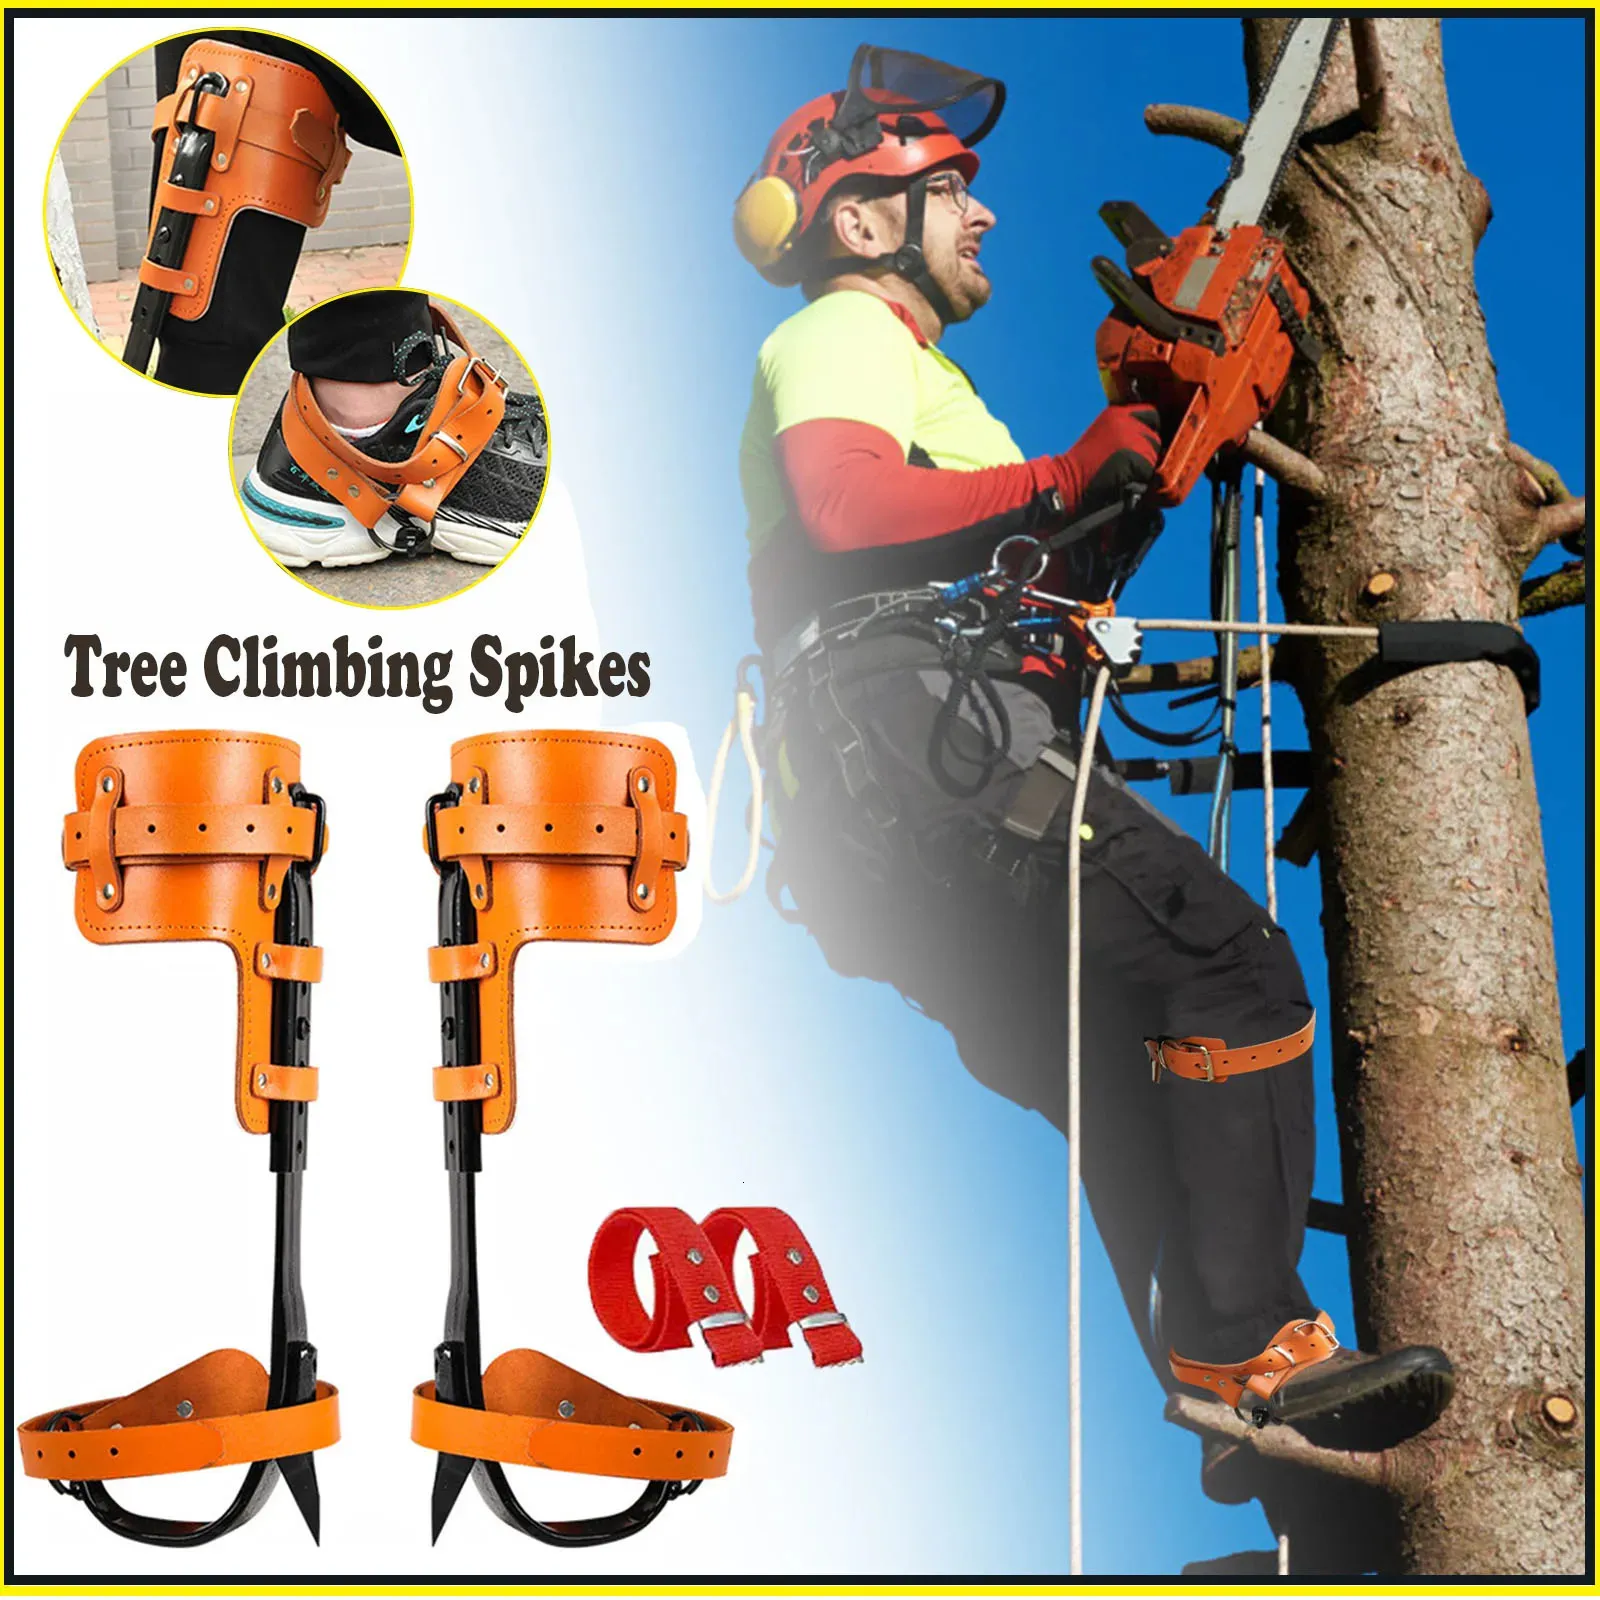 Thickened Tree Tree Climbing Saddle With Non Skid Pedal Spikes  Mountaineering Equipment For Climbers And Trees 231021 From Bao05, $154.1